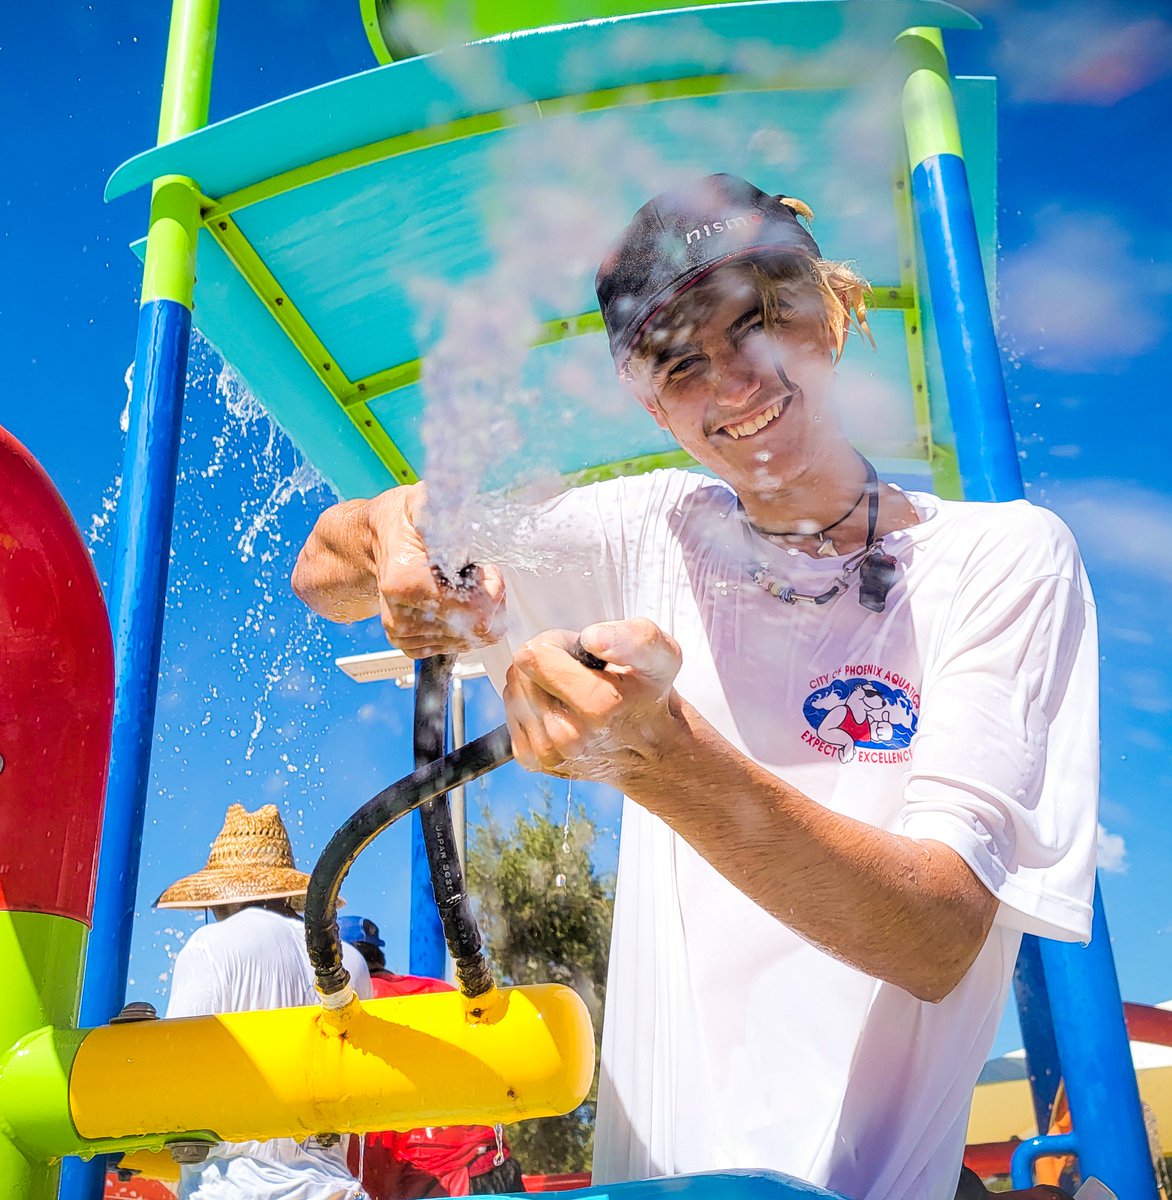 Teens looking for a summer job won’t want to miss this! Make $14.02 per hour as a certified lifeguard. Attend our StarGuard lifeguard certification training Feb. 20-28 at David C. Uribe Pool. Applicants must be at least 15 years old. Register today. ow.ly/xTKB50HAqyO